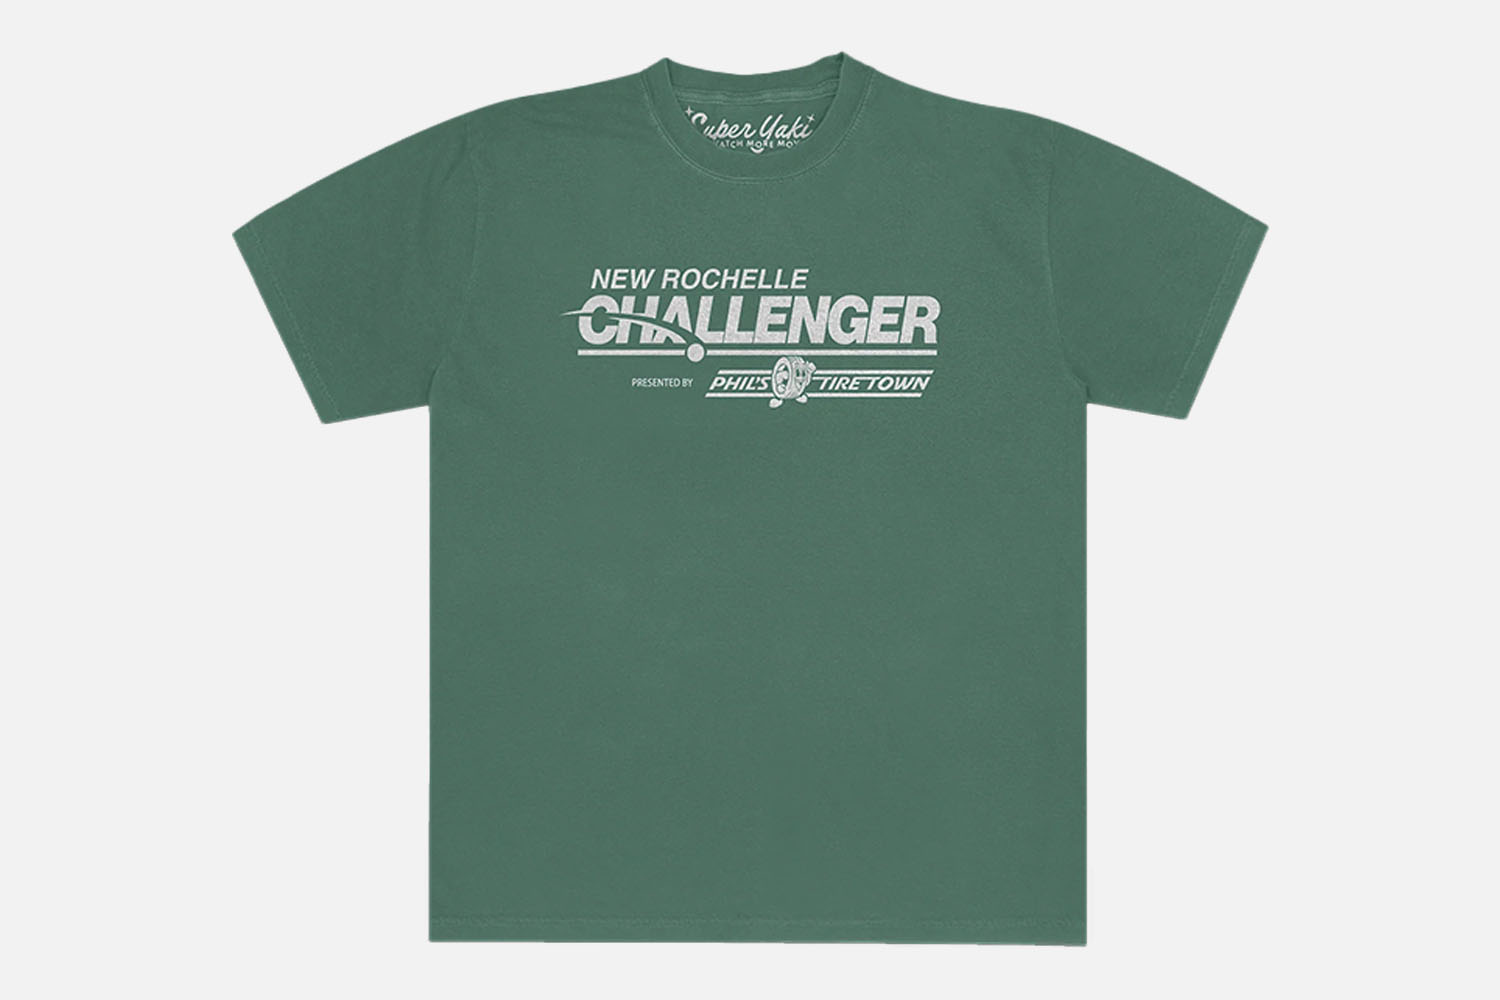 The New Rochelle Challenger Presented By Phil’s Tiretown Tee